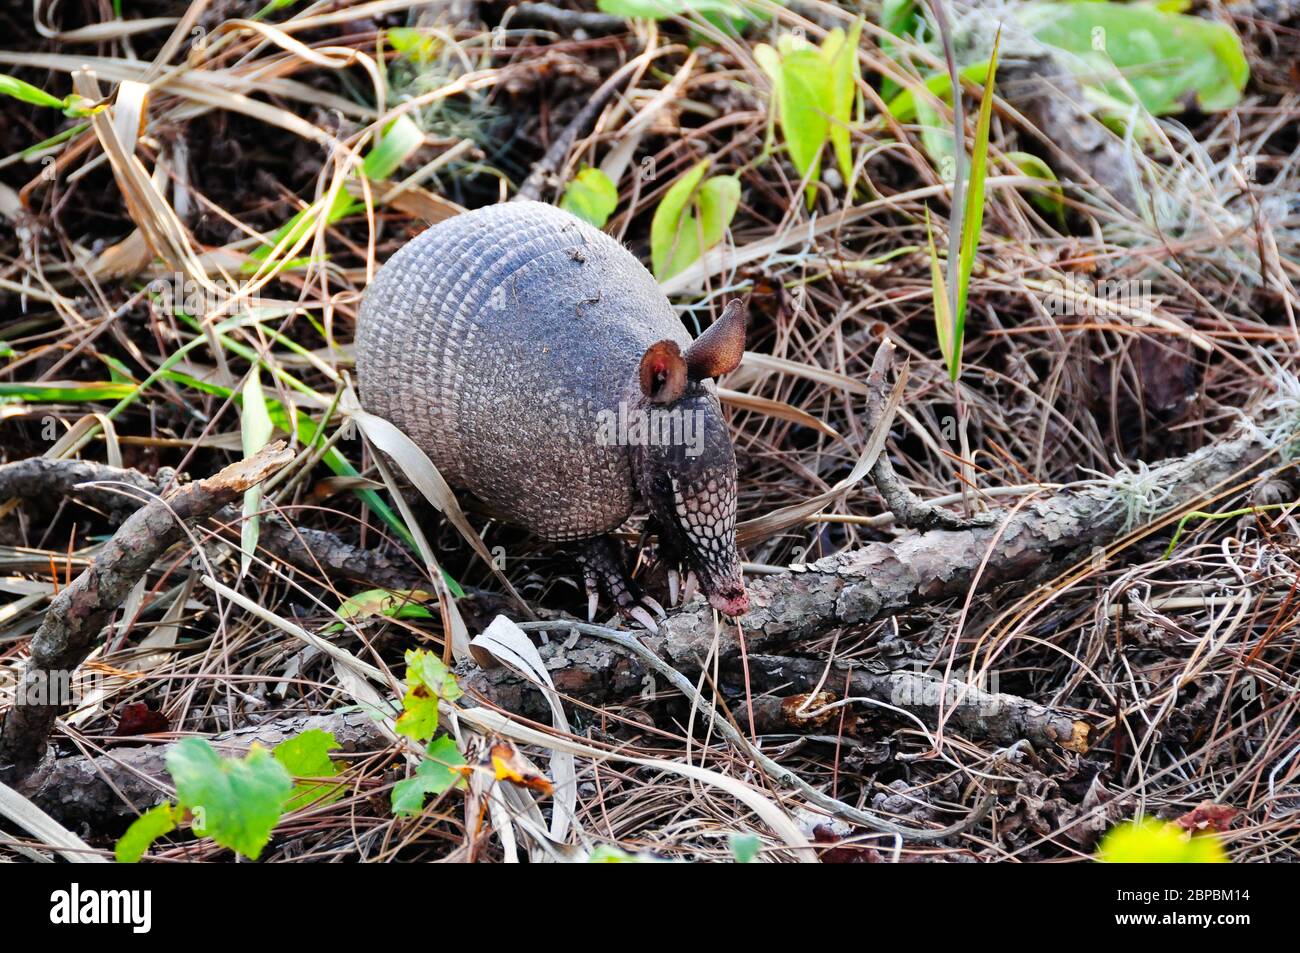 Nine-banded armadillo grubbing for food in a swampy area in Florida. The nine-banded armadillo is the only armadillo found in the United States. Stock Photo